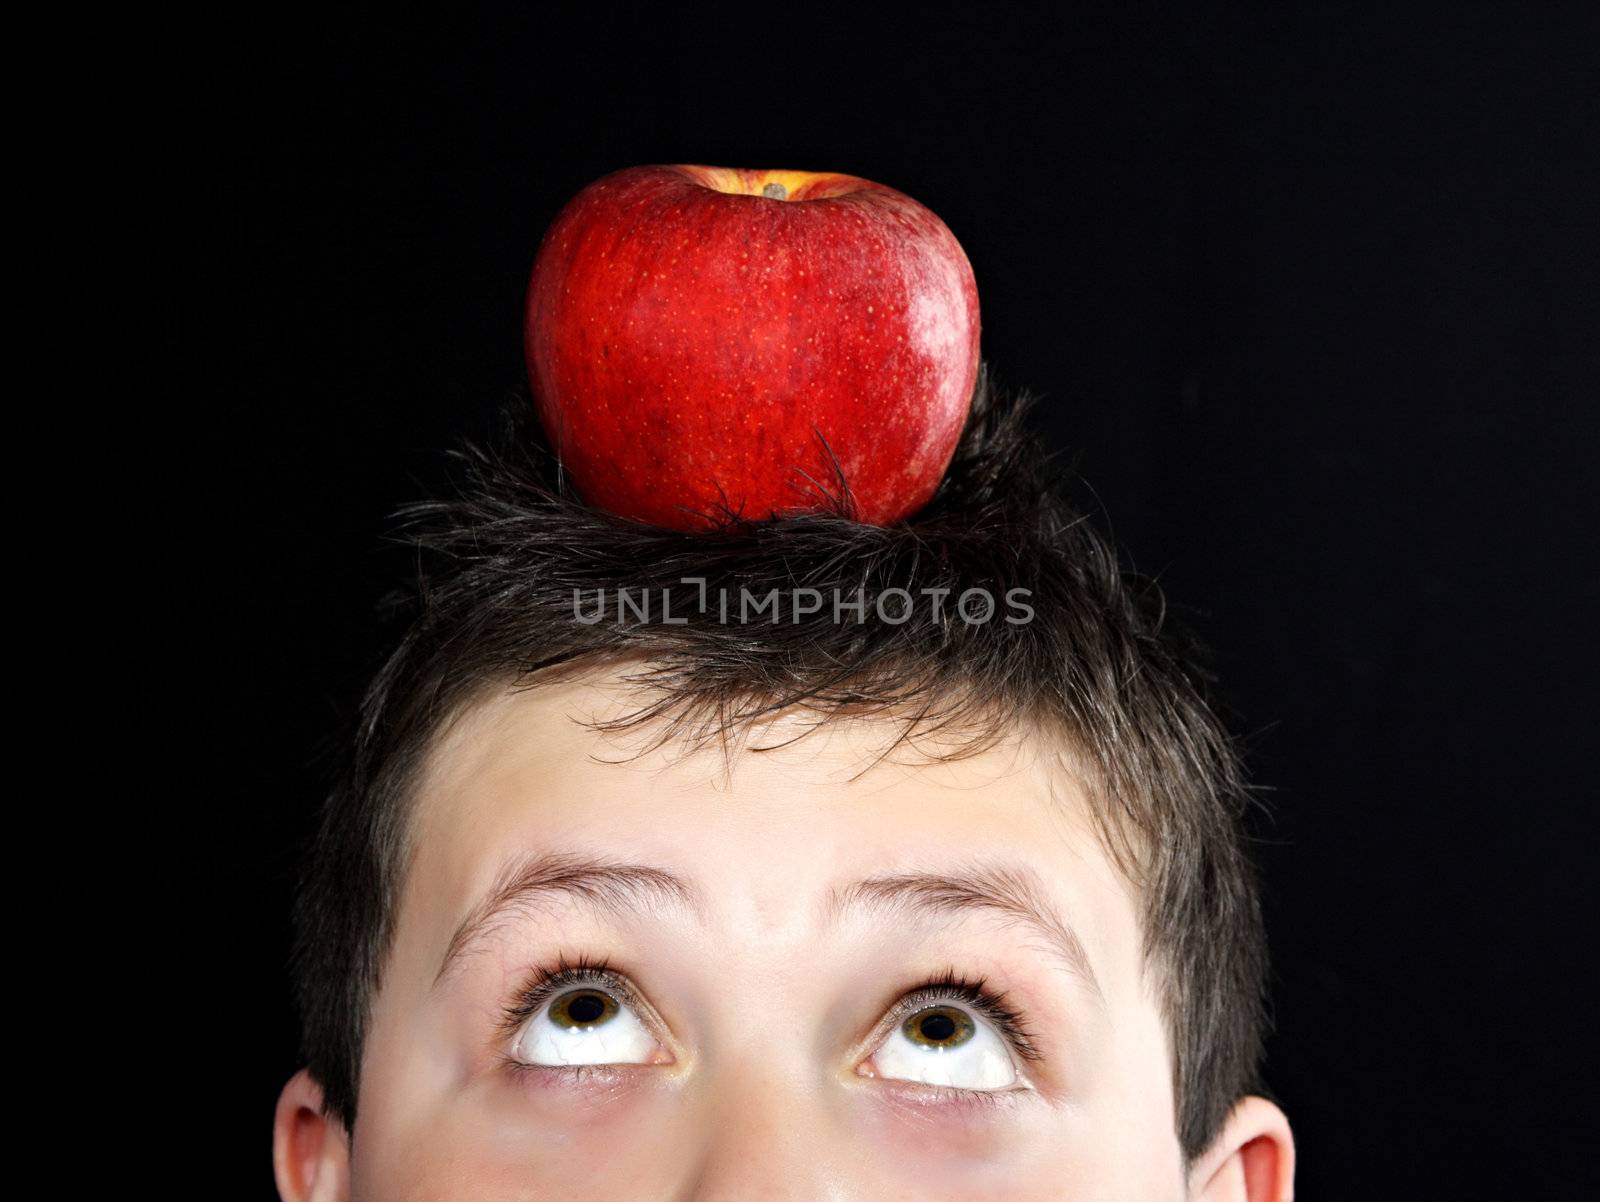 boy with apple on head by lanalanglois